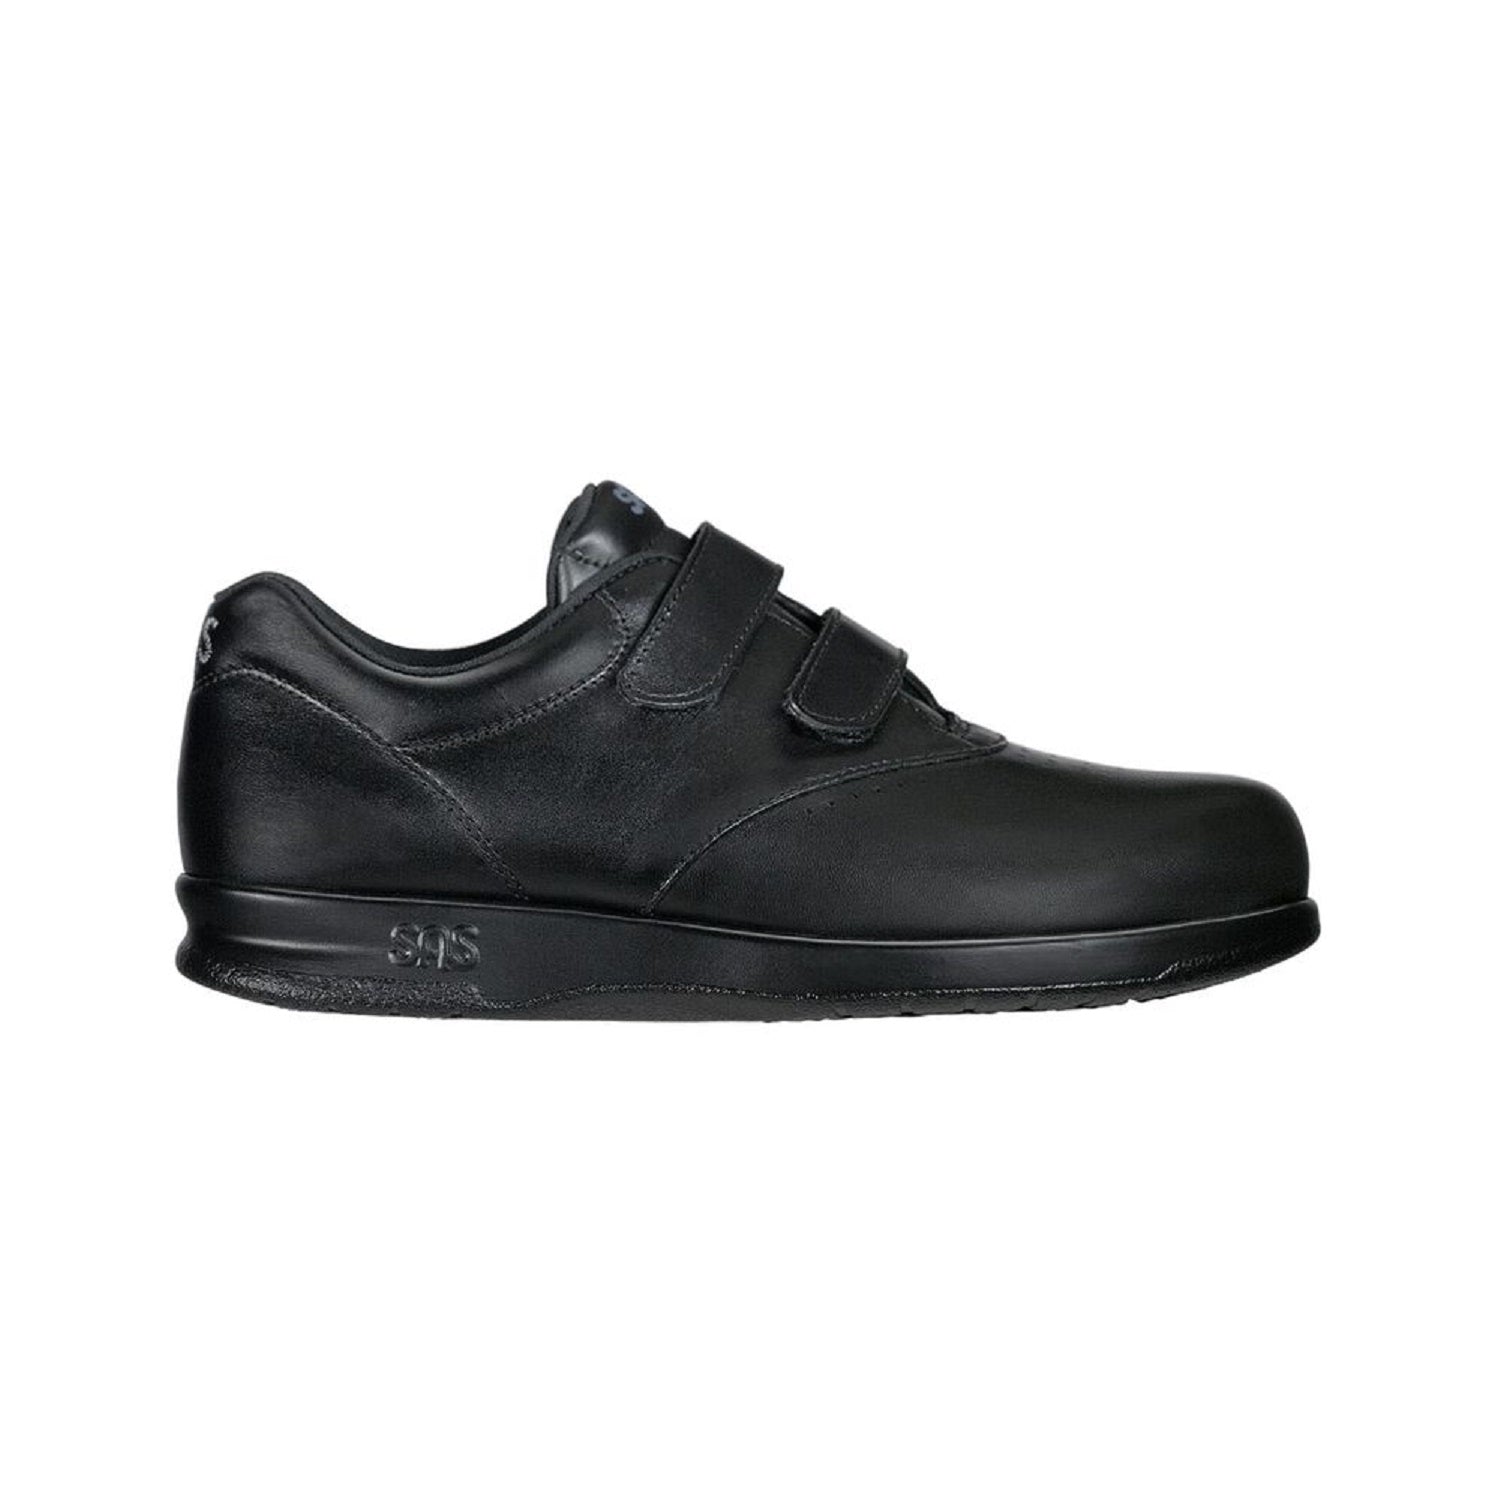 Black leather shoe with two velcro straps.